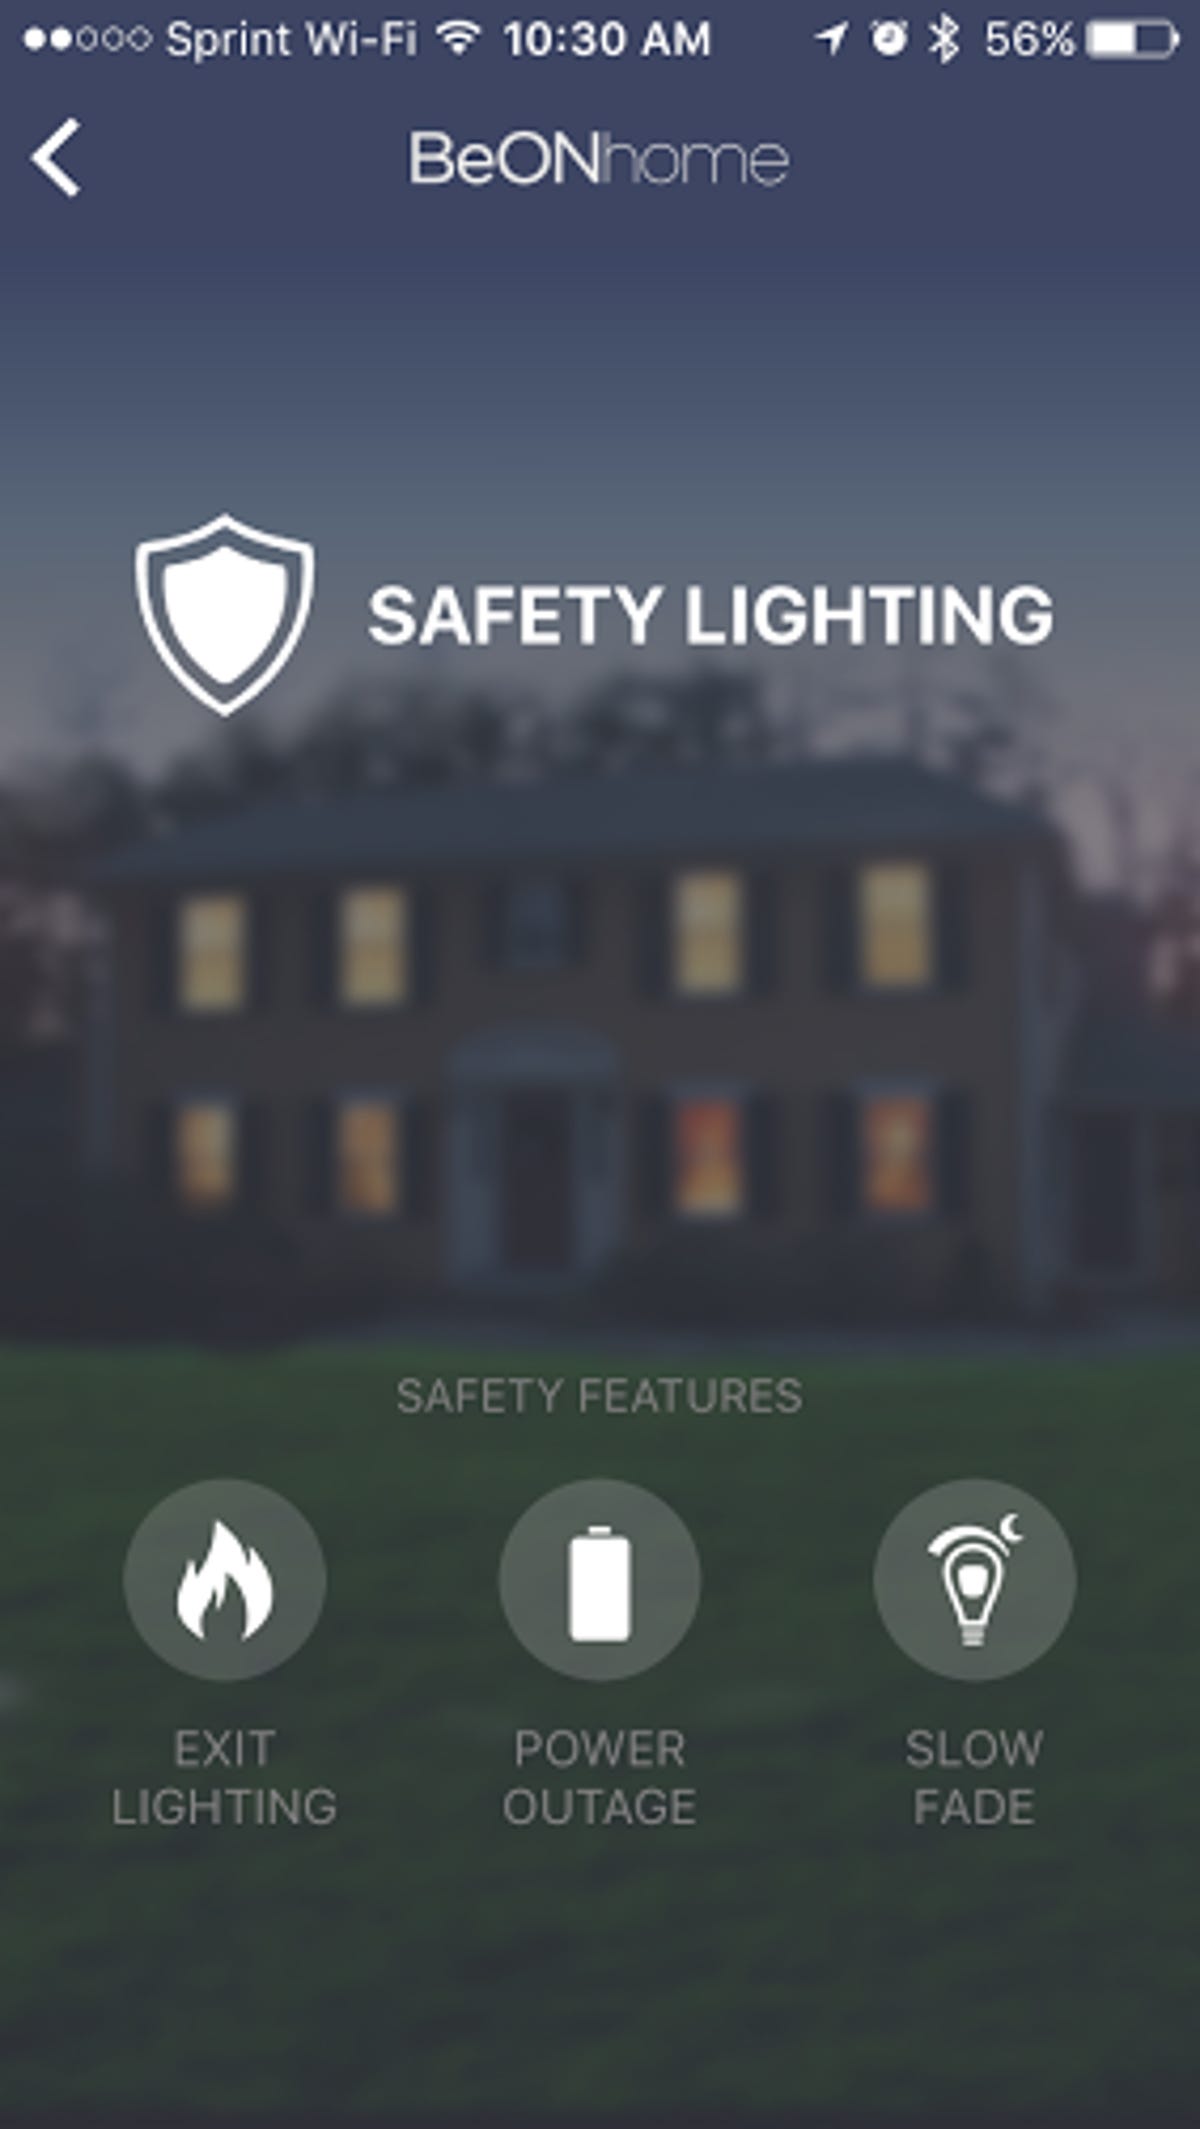 beon-app-safety-lighting.png